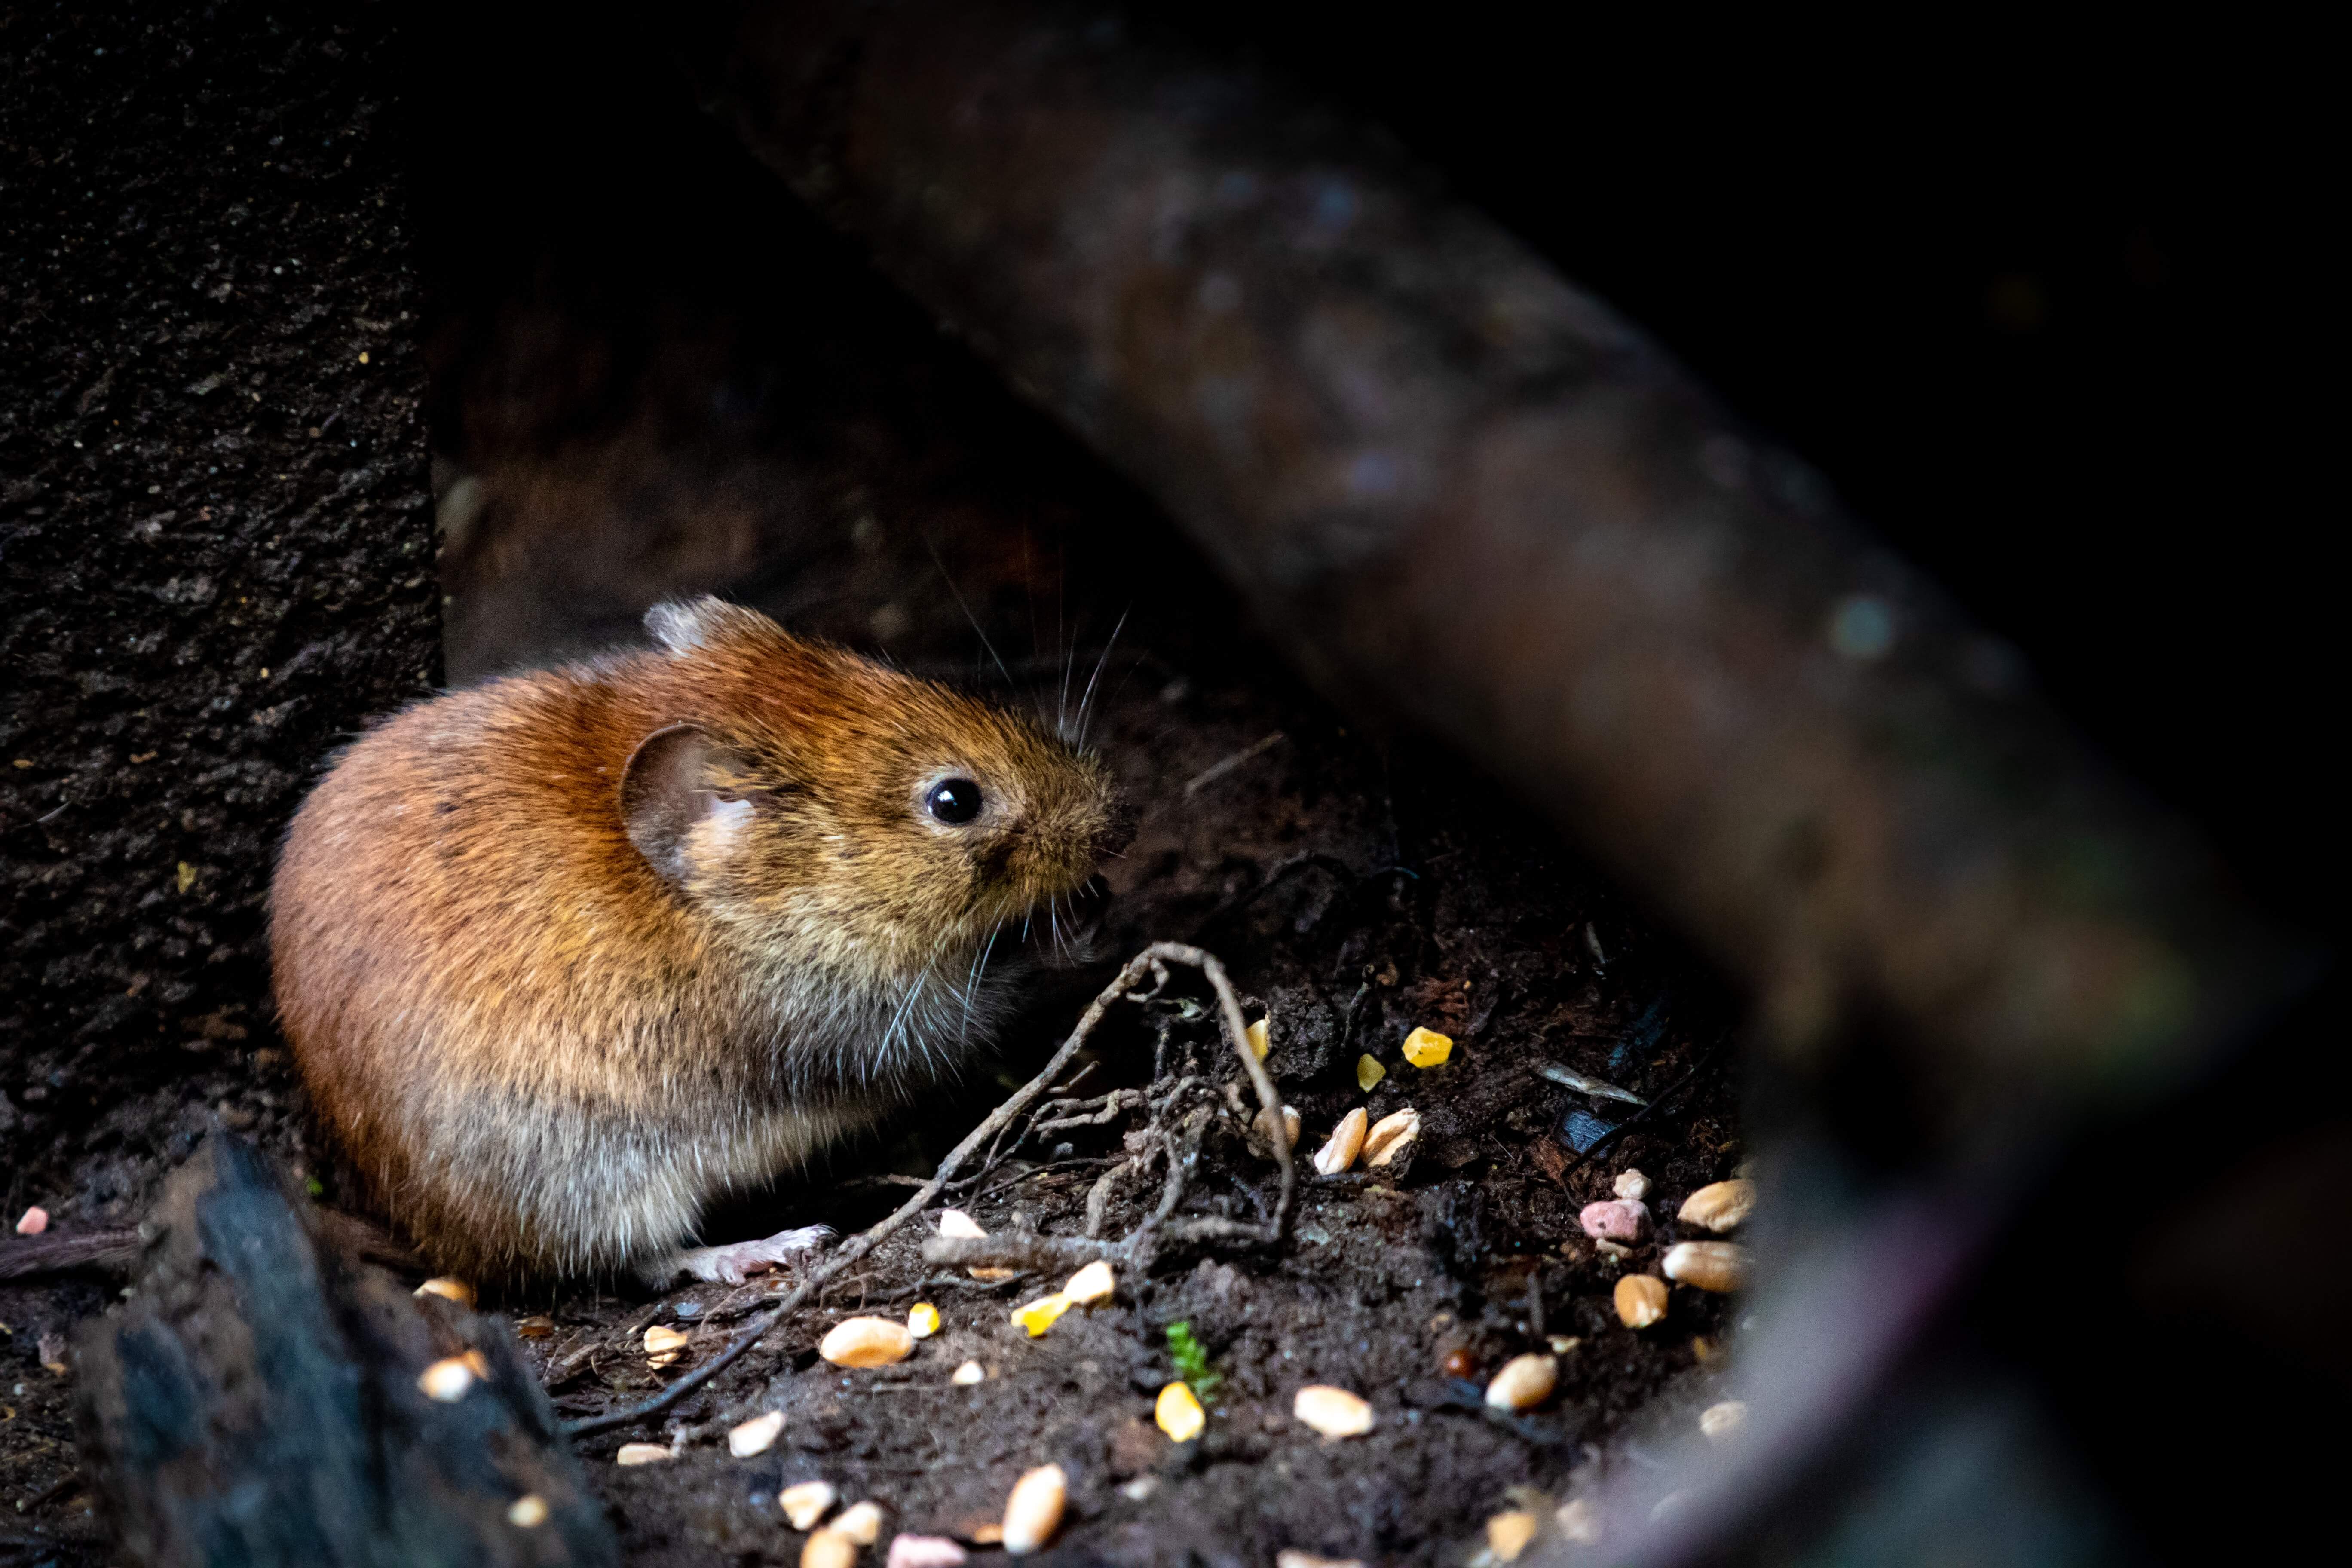 Three new deaths from hantavirus confirmed in Chubut